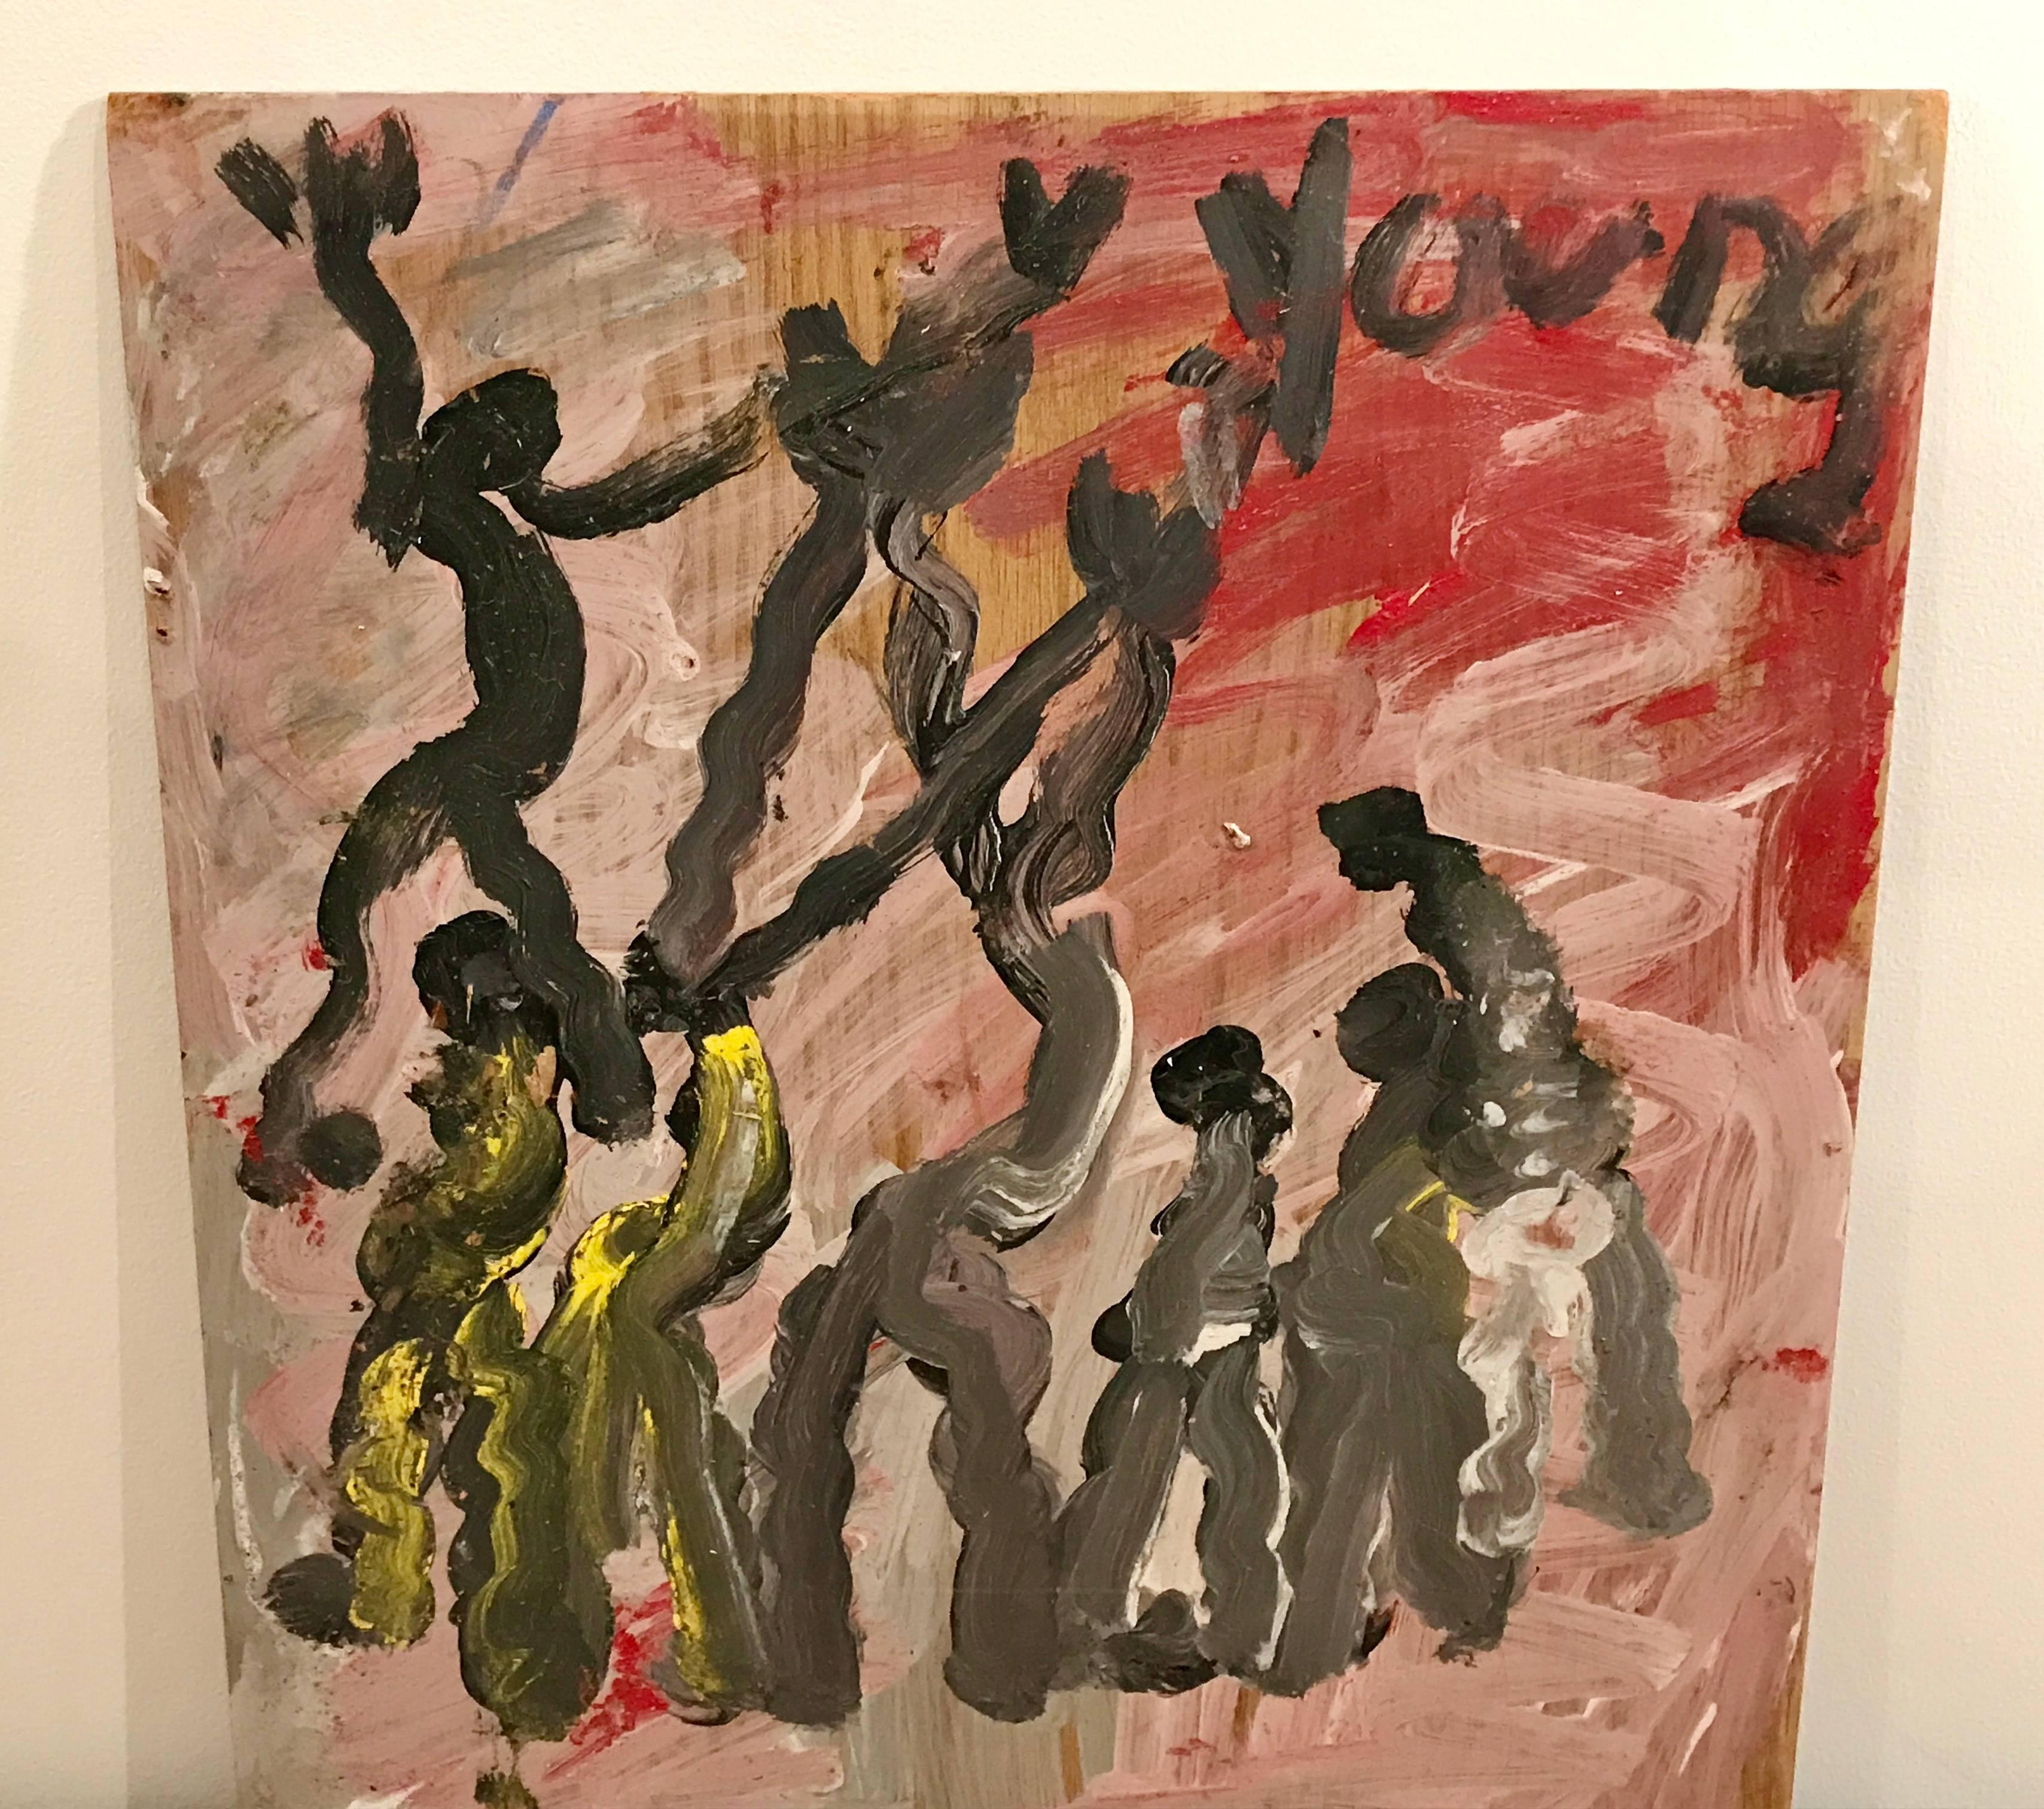 Abstract painting depicting modern dancers by American artist Purvis Young, acrylic on found particle board.